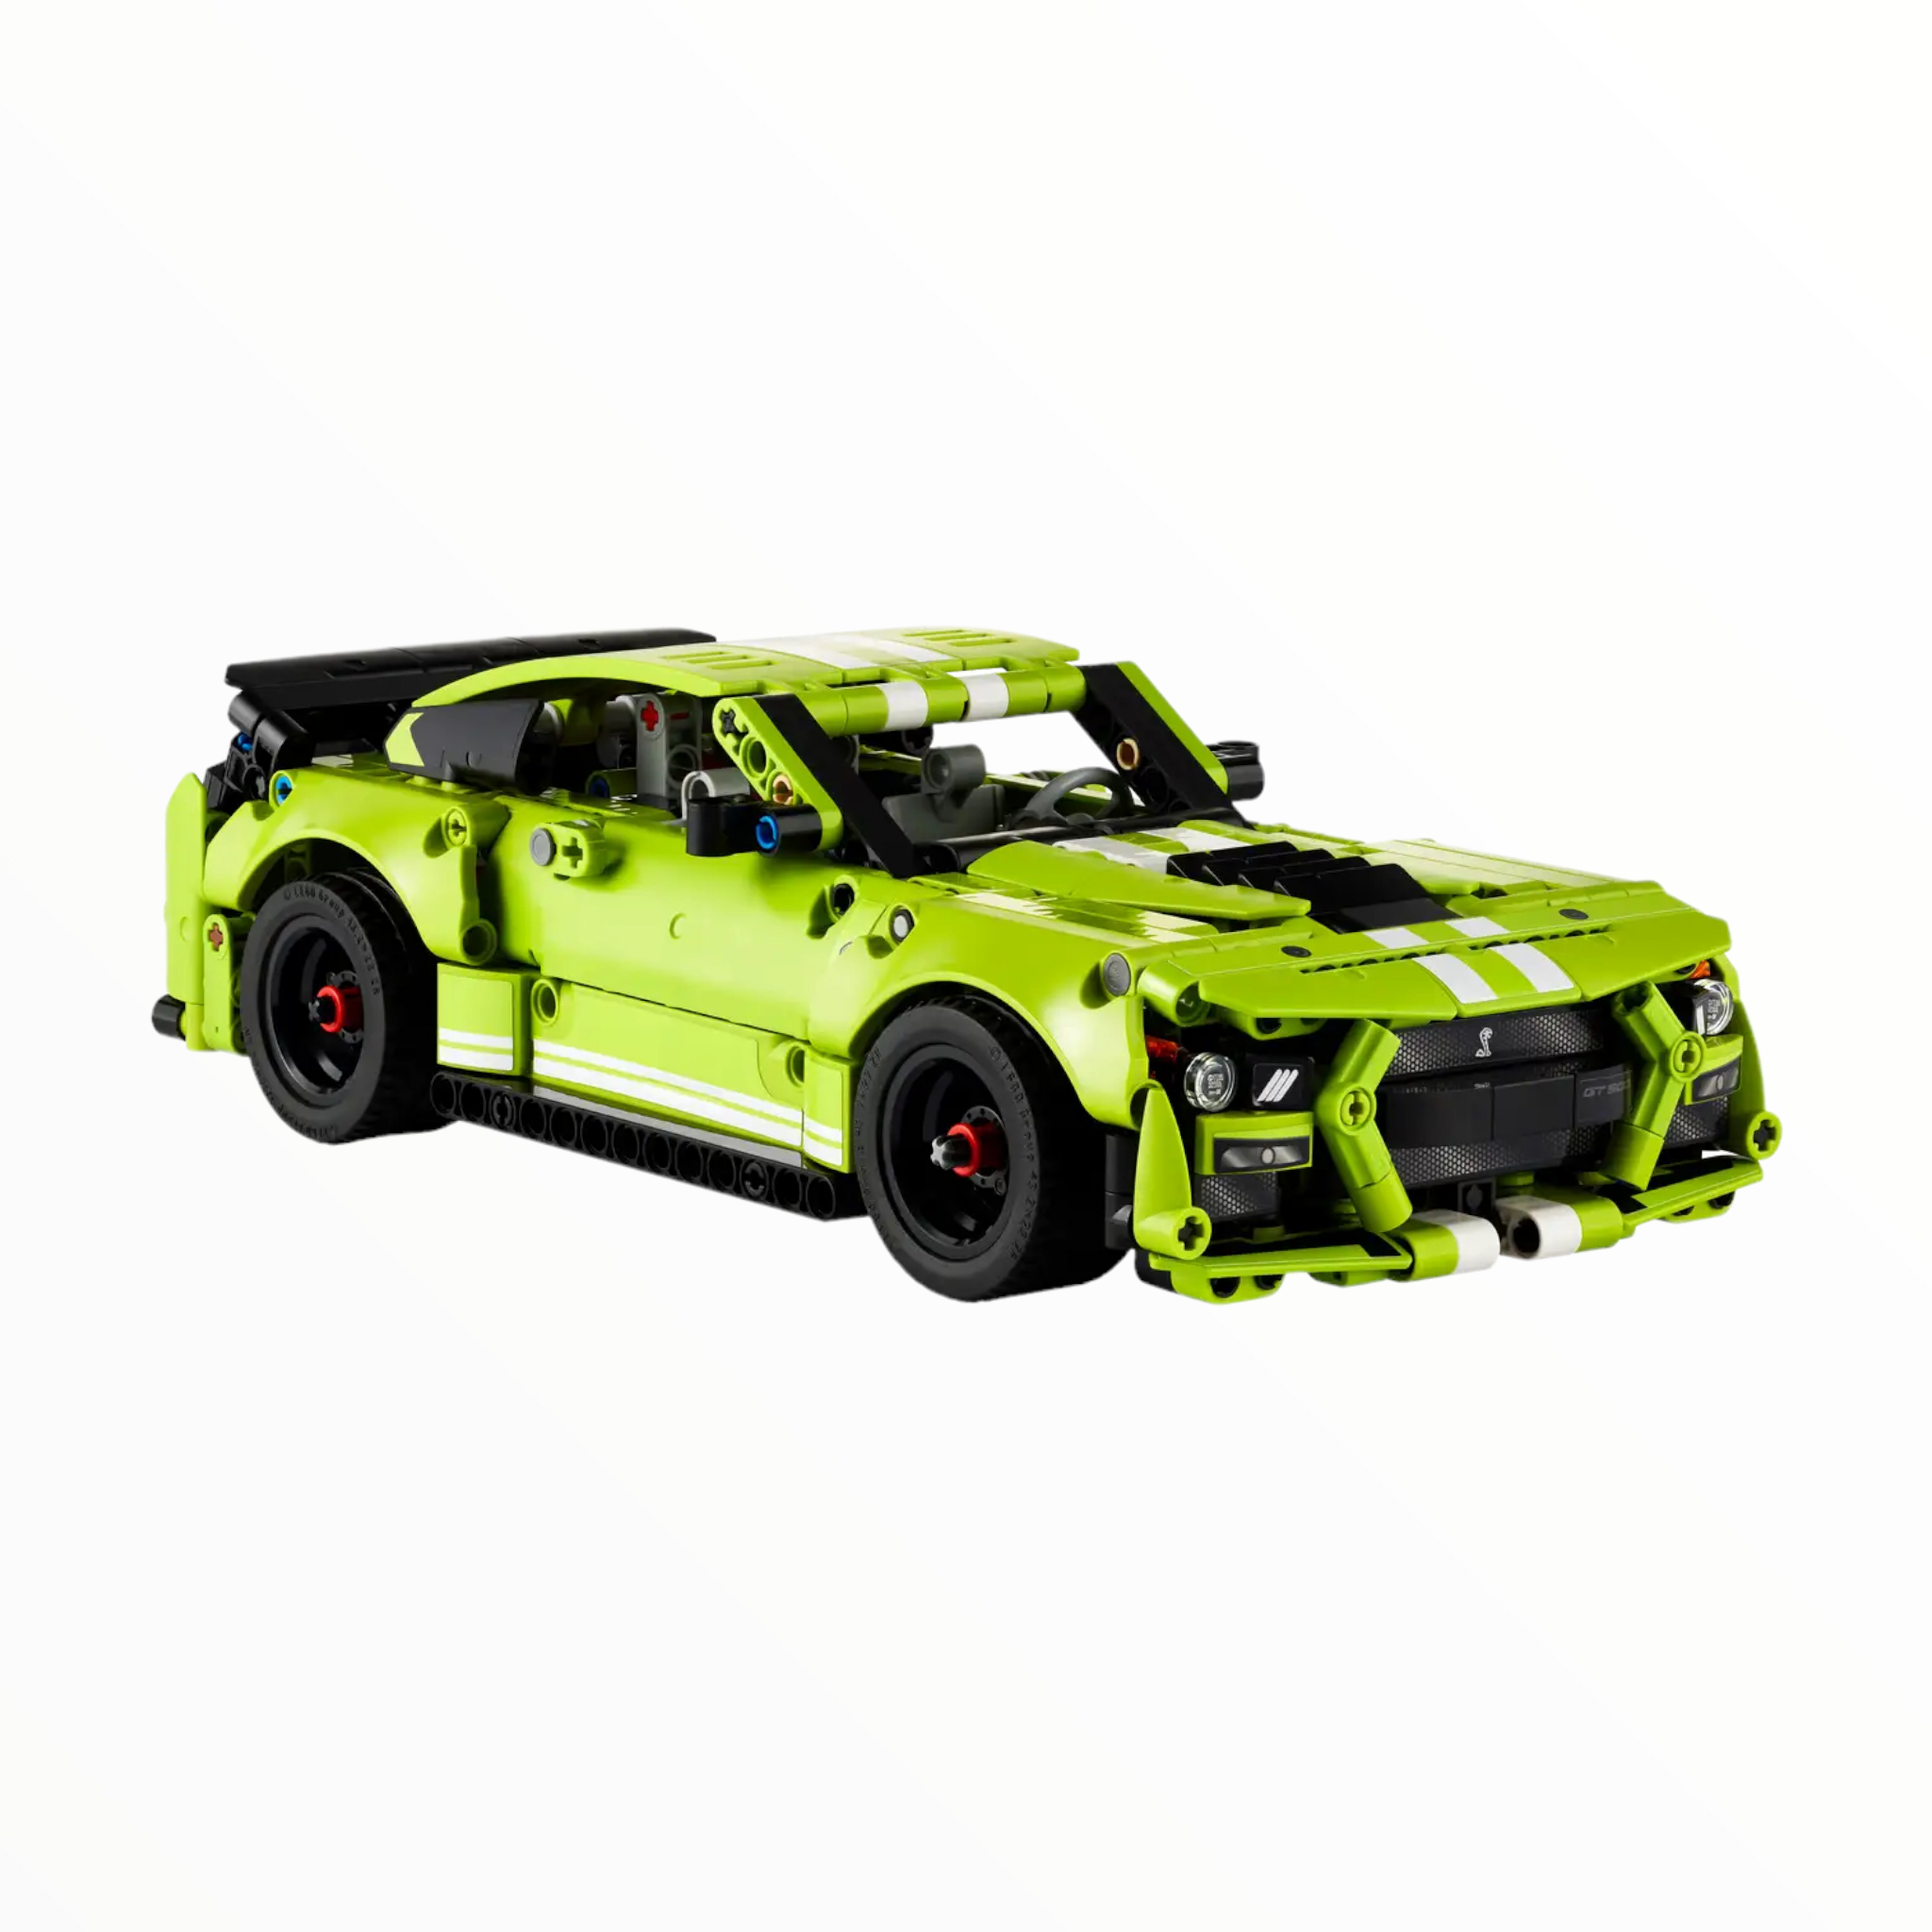 42138 Technic Ford Mustang Shelby GT500